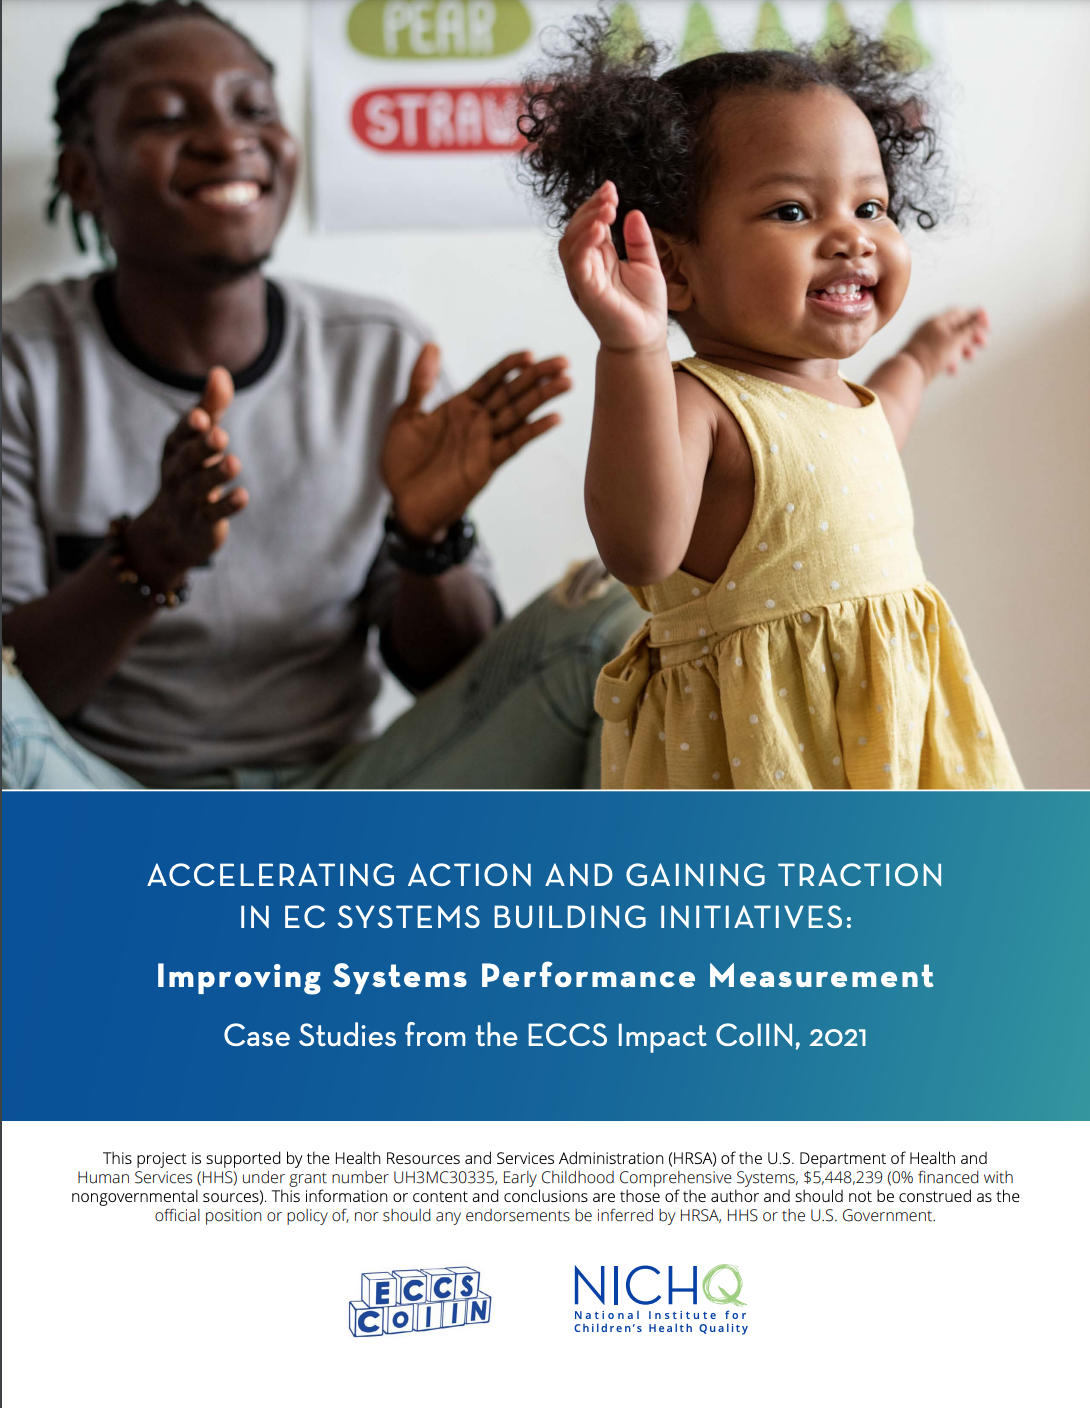 Improving Systems Performance Measurement